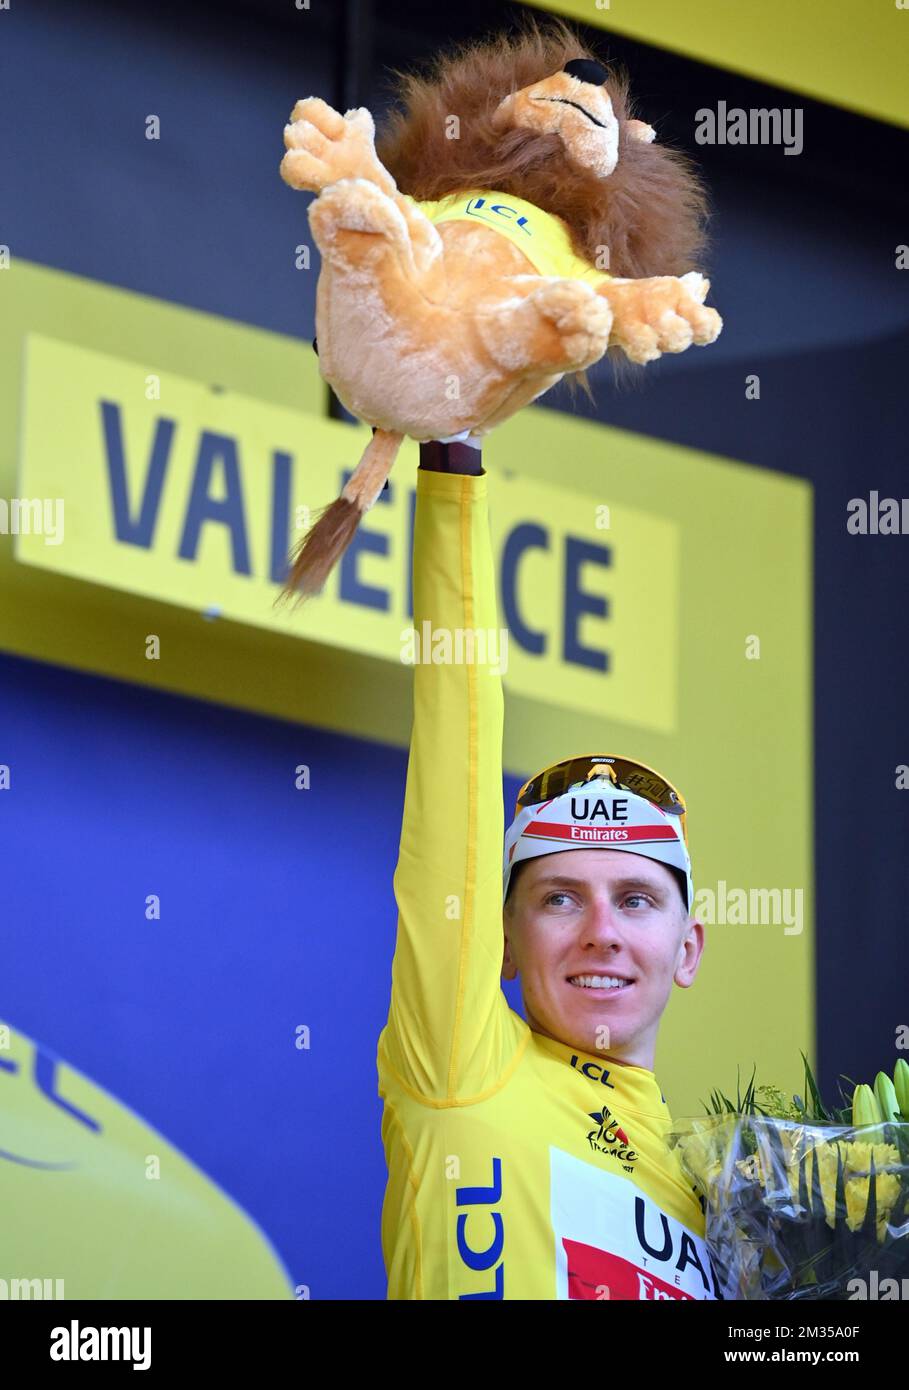 Slovenian Tadej Pogacar of UAE Team Emirates celebrates in the yellow jersey of leader in the overall ranking after stage 10 of the 108th edition of the Tour de France cycling race, 190,7 km from Albertville to Valence, France, Tuesday 06 July 2021. This year's Tour de France takes place from 26 June to 18 July 2021. BELGA PHOTO DAVID STOCKMAN Stock Photo